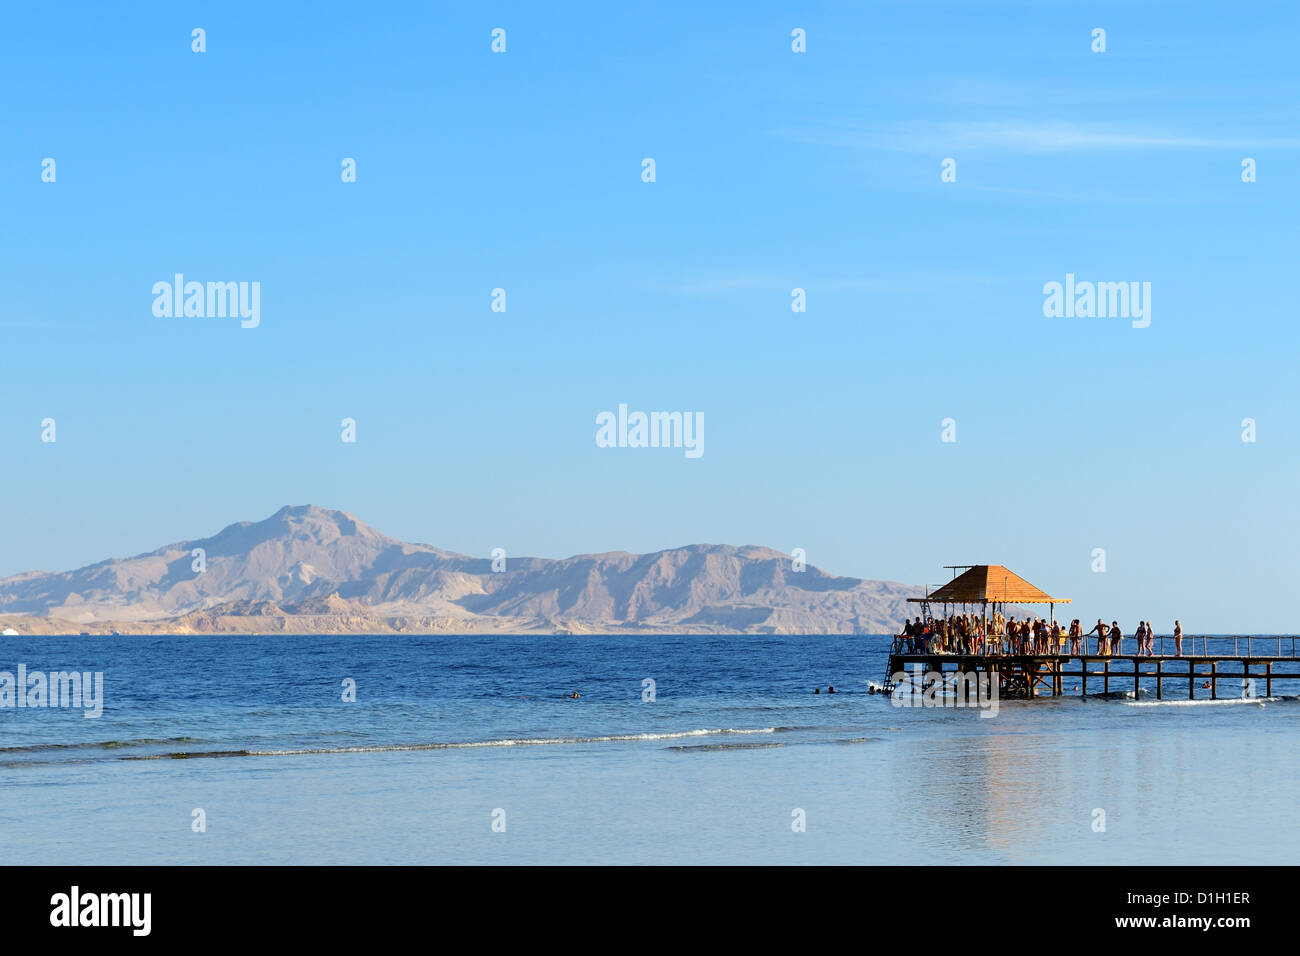 The beach with a view on Tiran island at luxury hotel, Sharm el Sheikh, Egypt Stock Photo